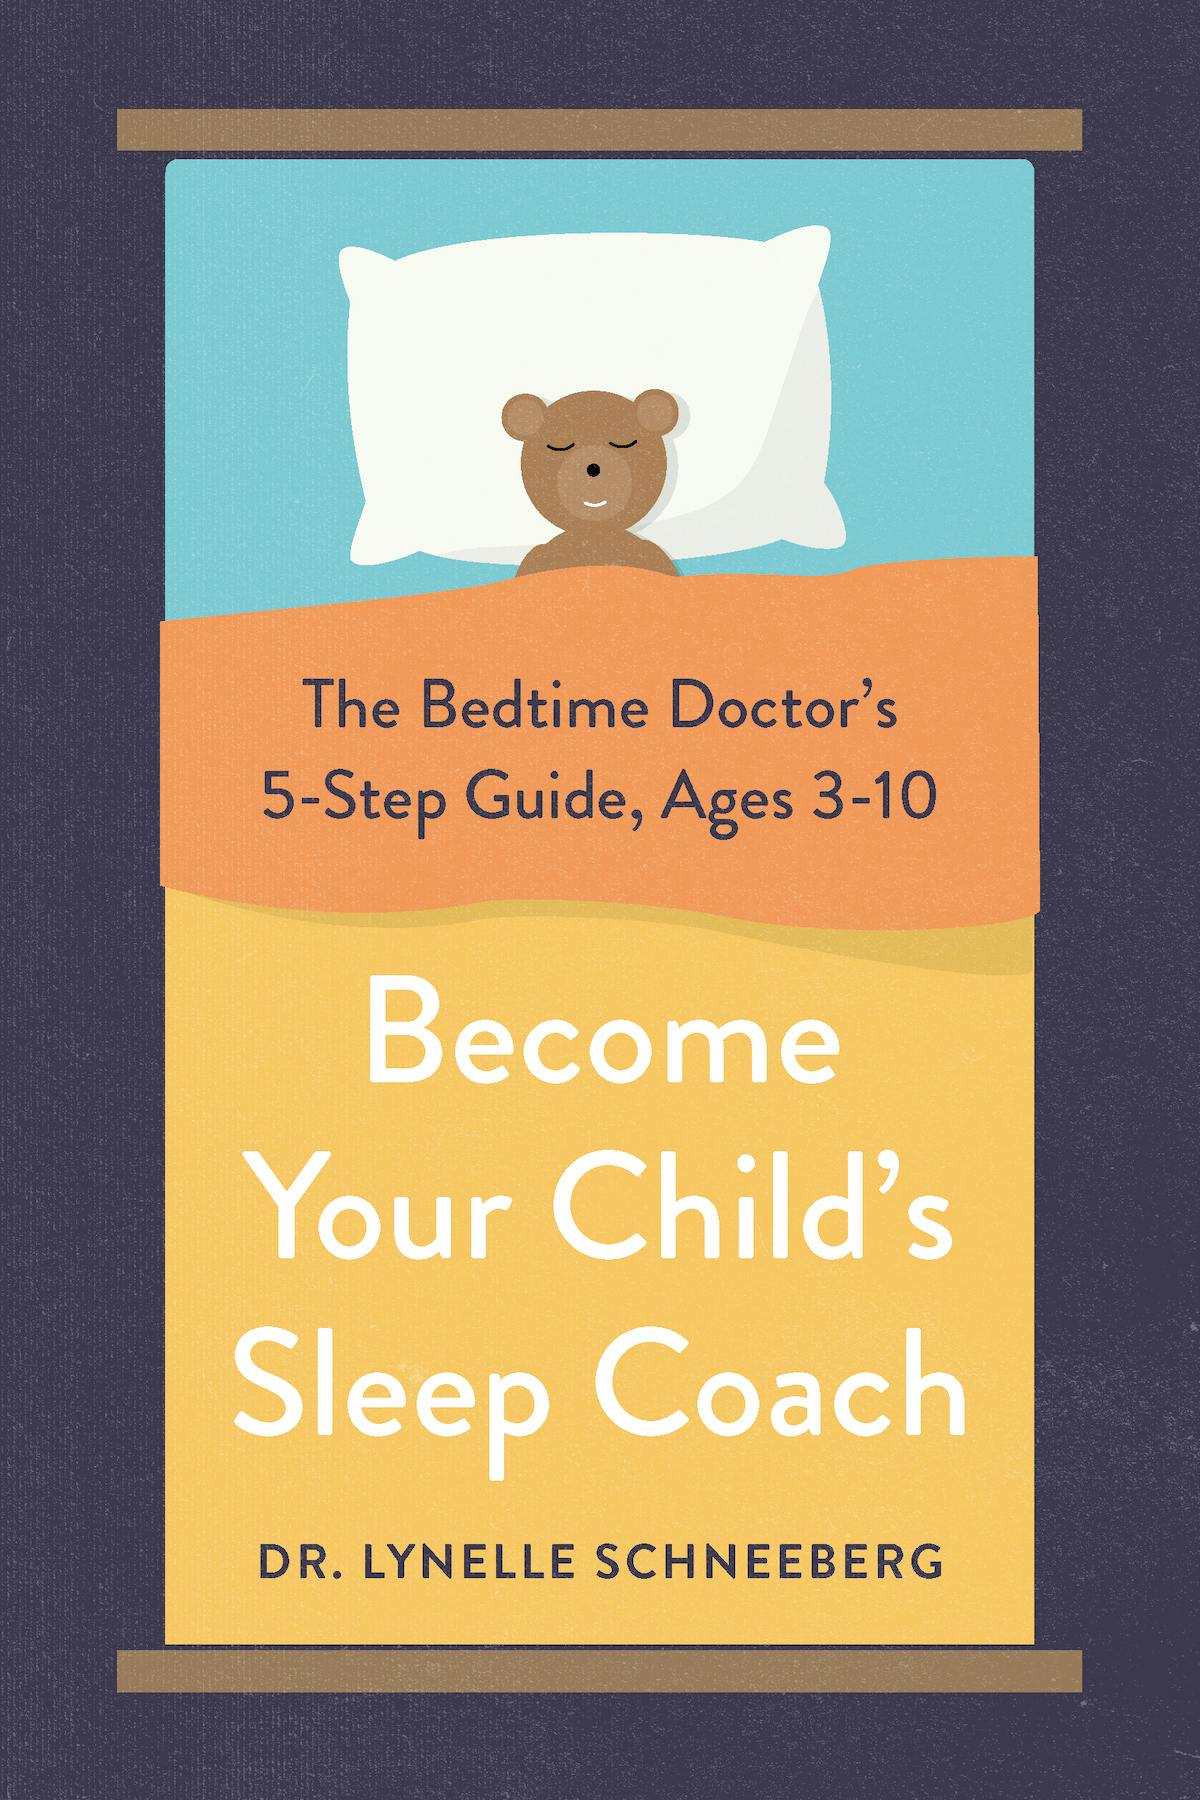 become your child's sleep coach by lynelle schneeberg